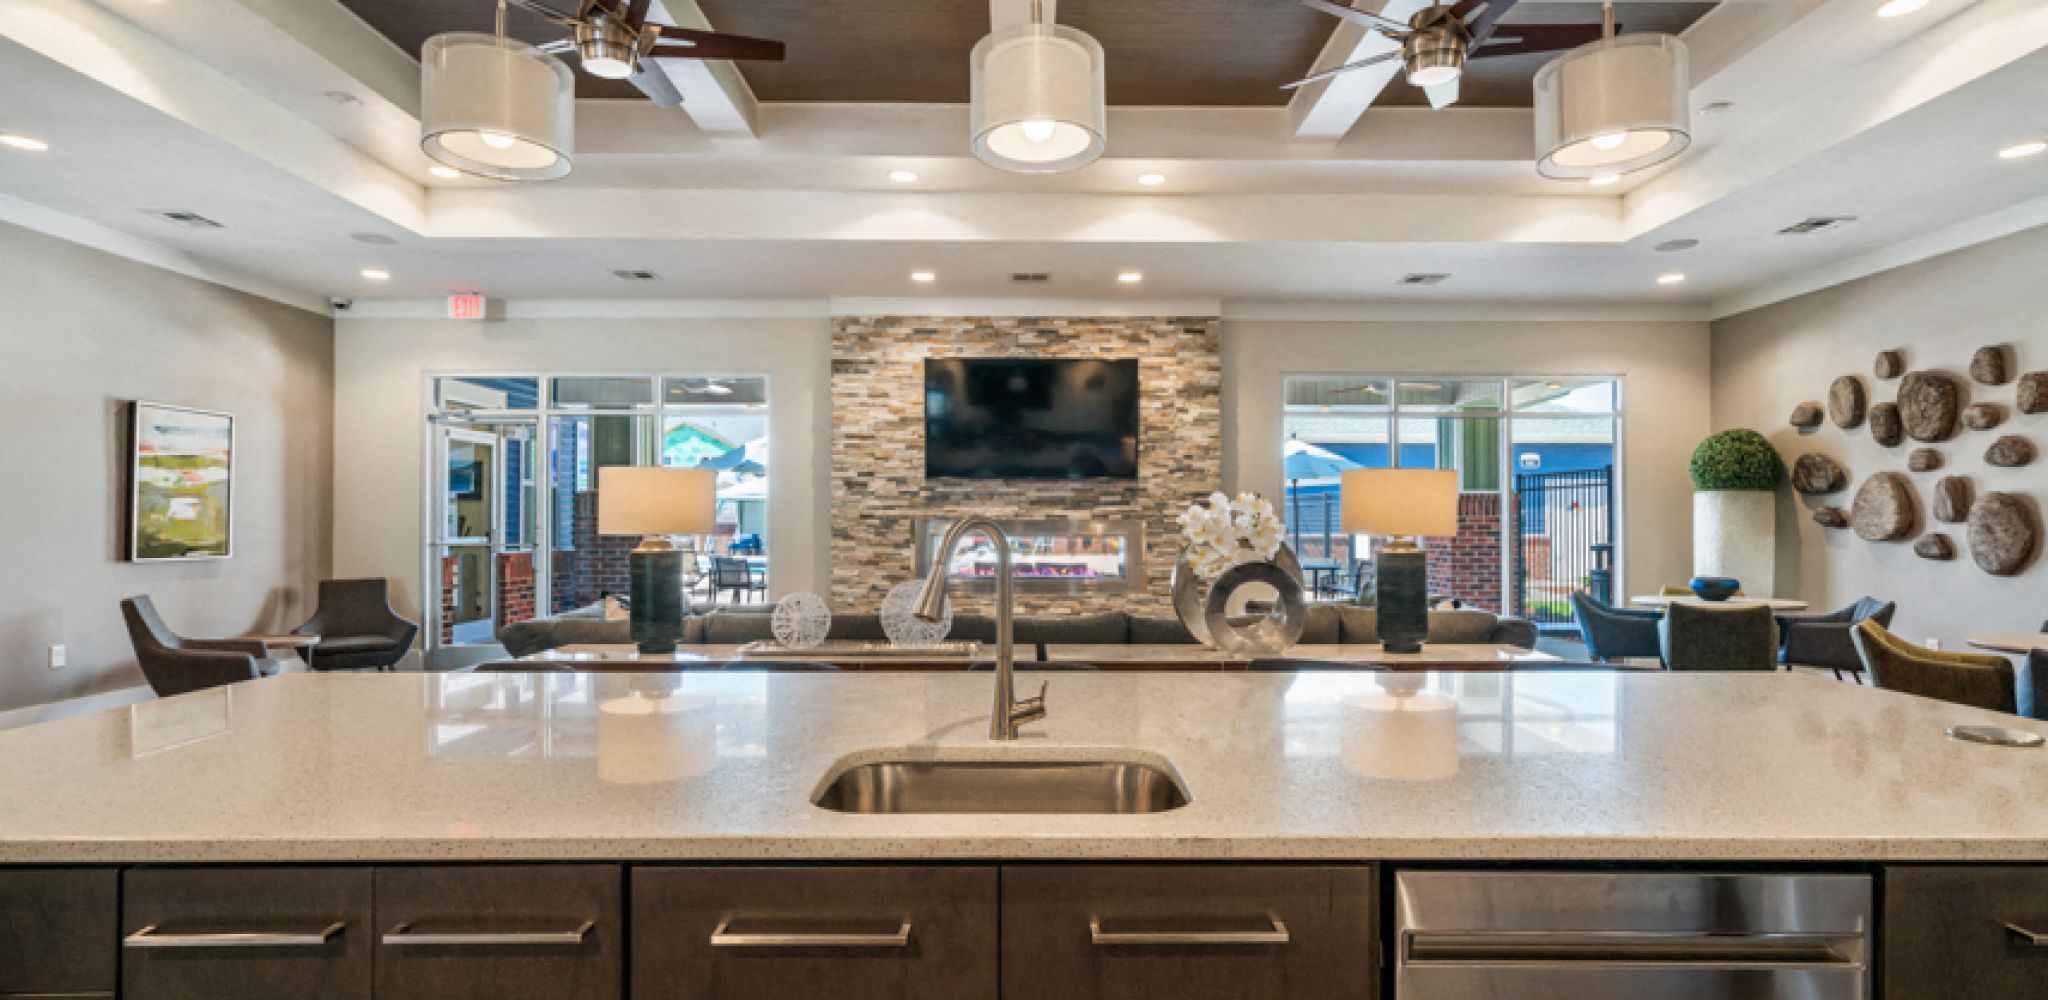 Hawthorne at Simpsonville amenity lounge area with entertainment space and kitchen